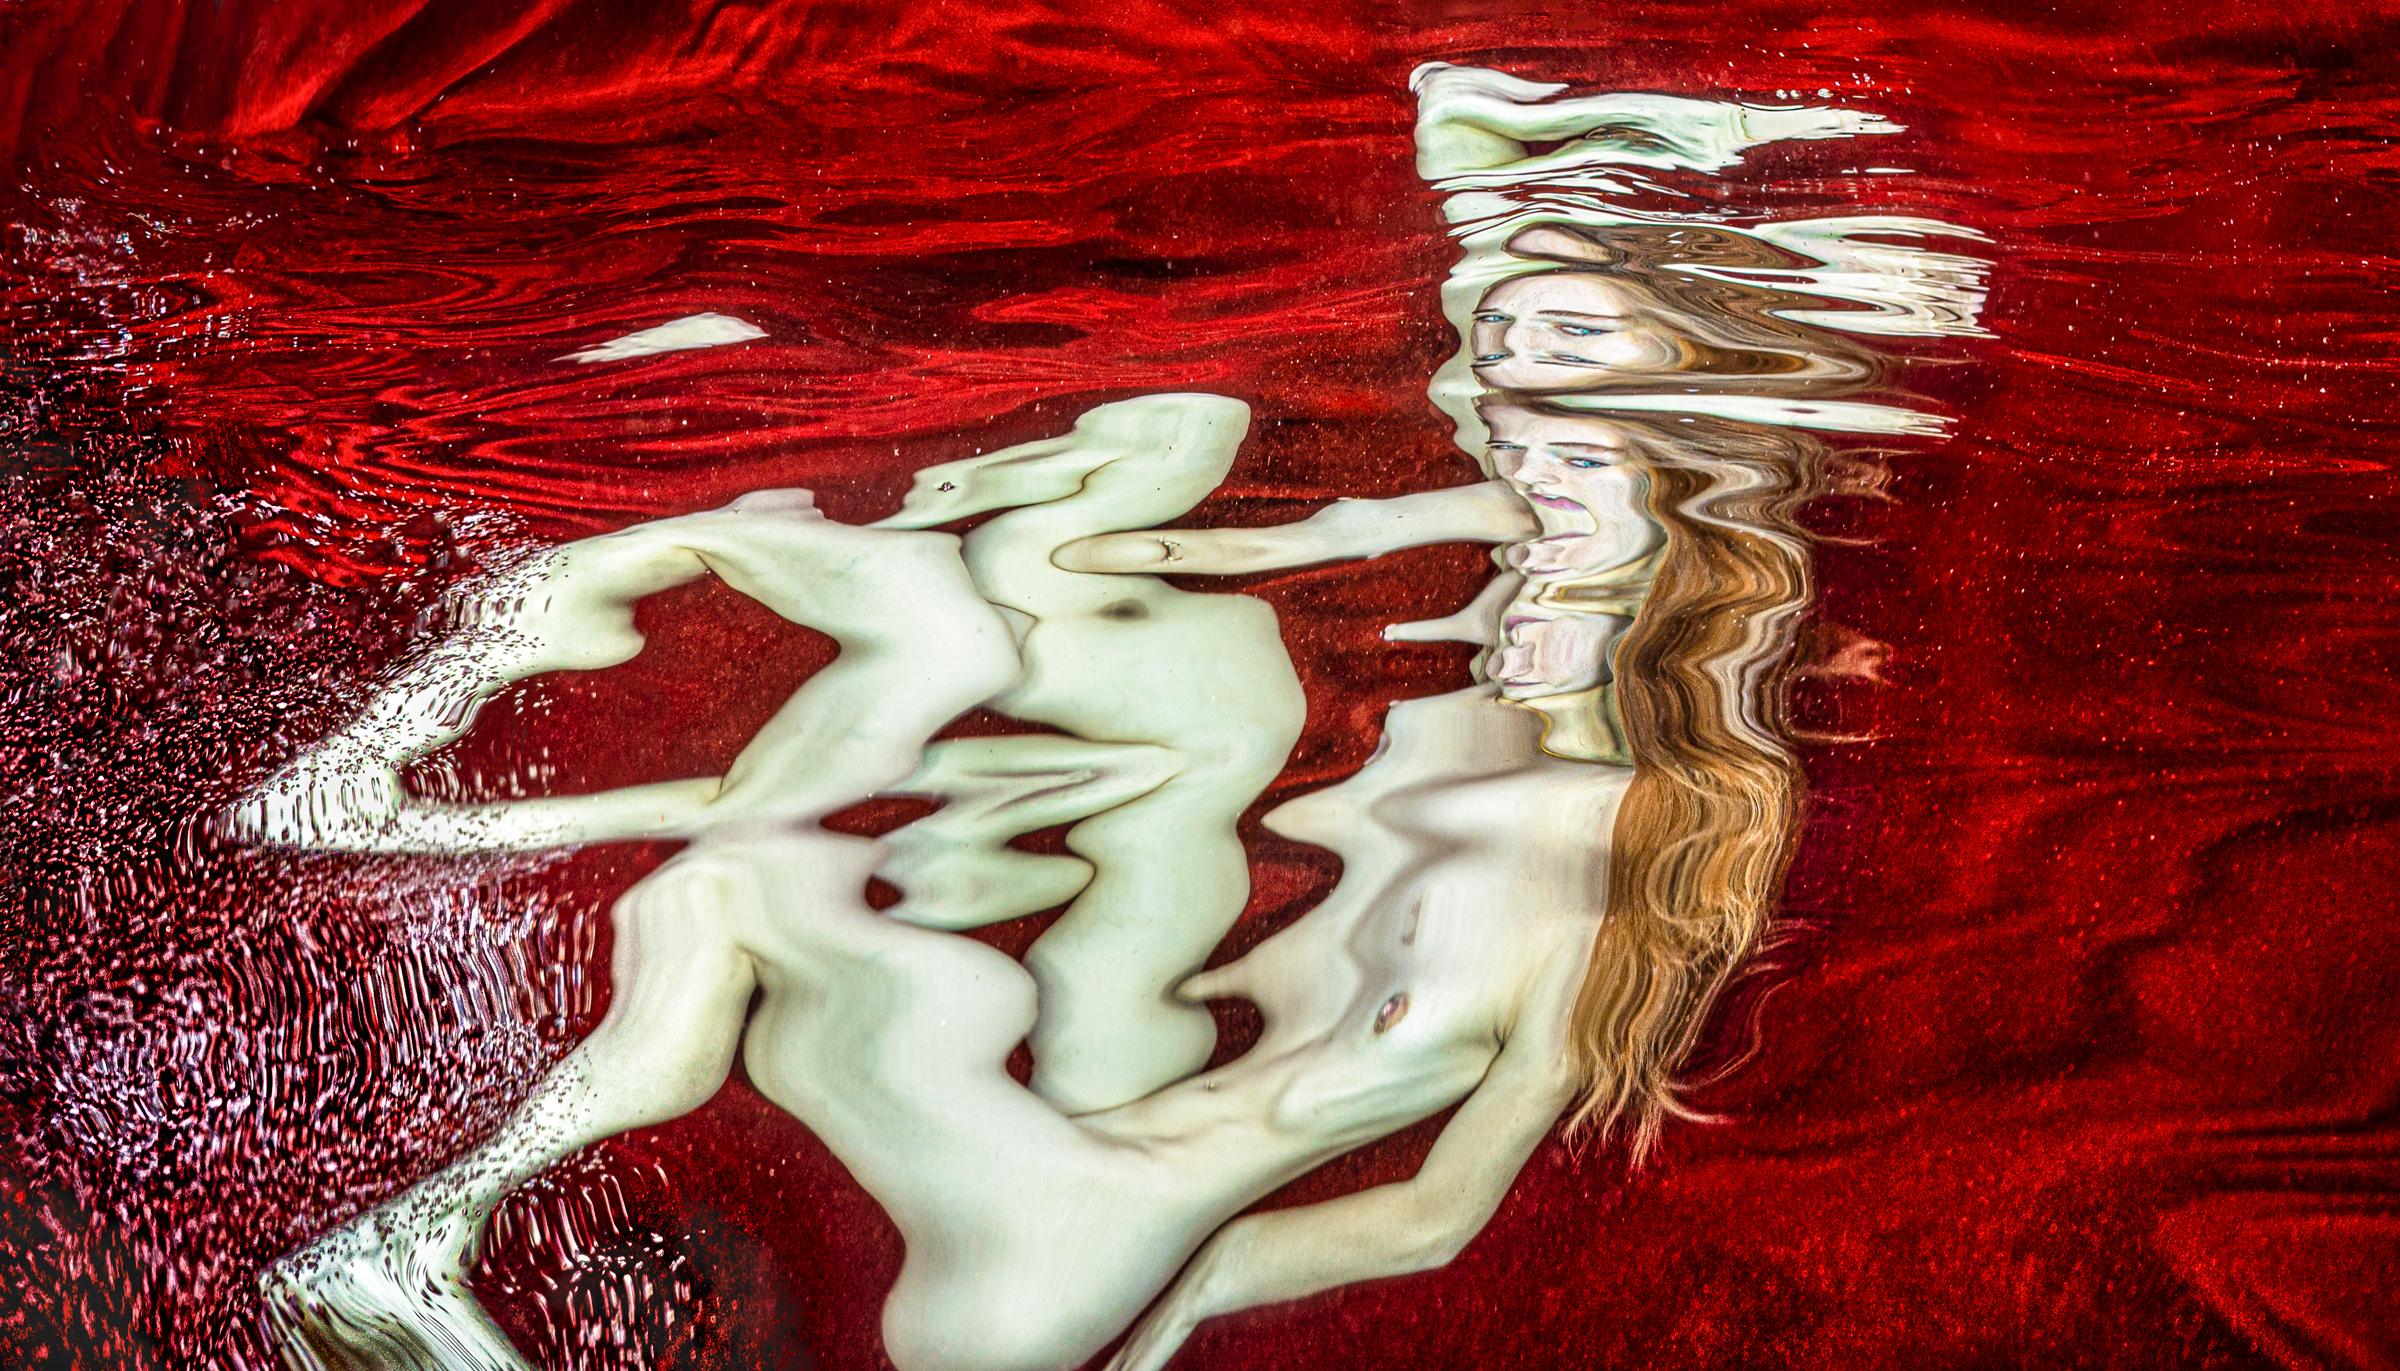 Alex Sher Abstract Photograph - The Trouble - photograph of an underwater reflection - archival print 15 x 23"